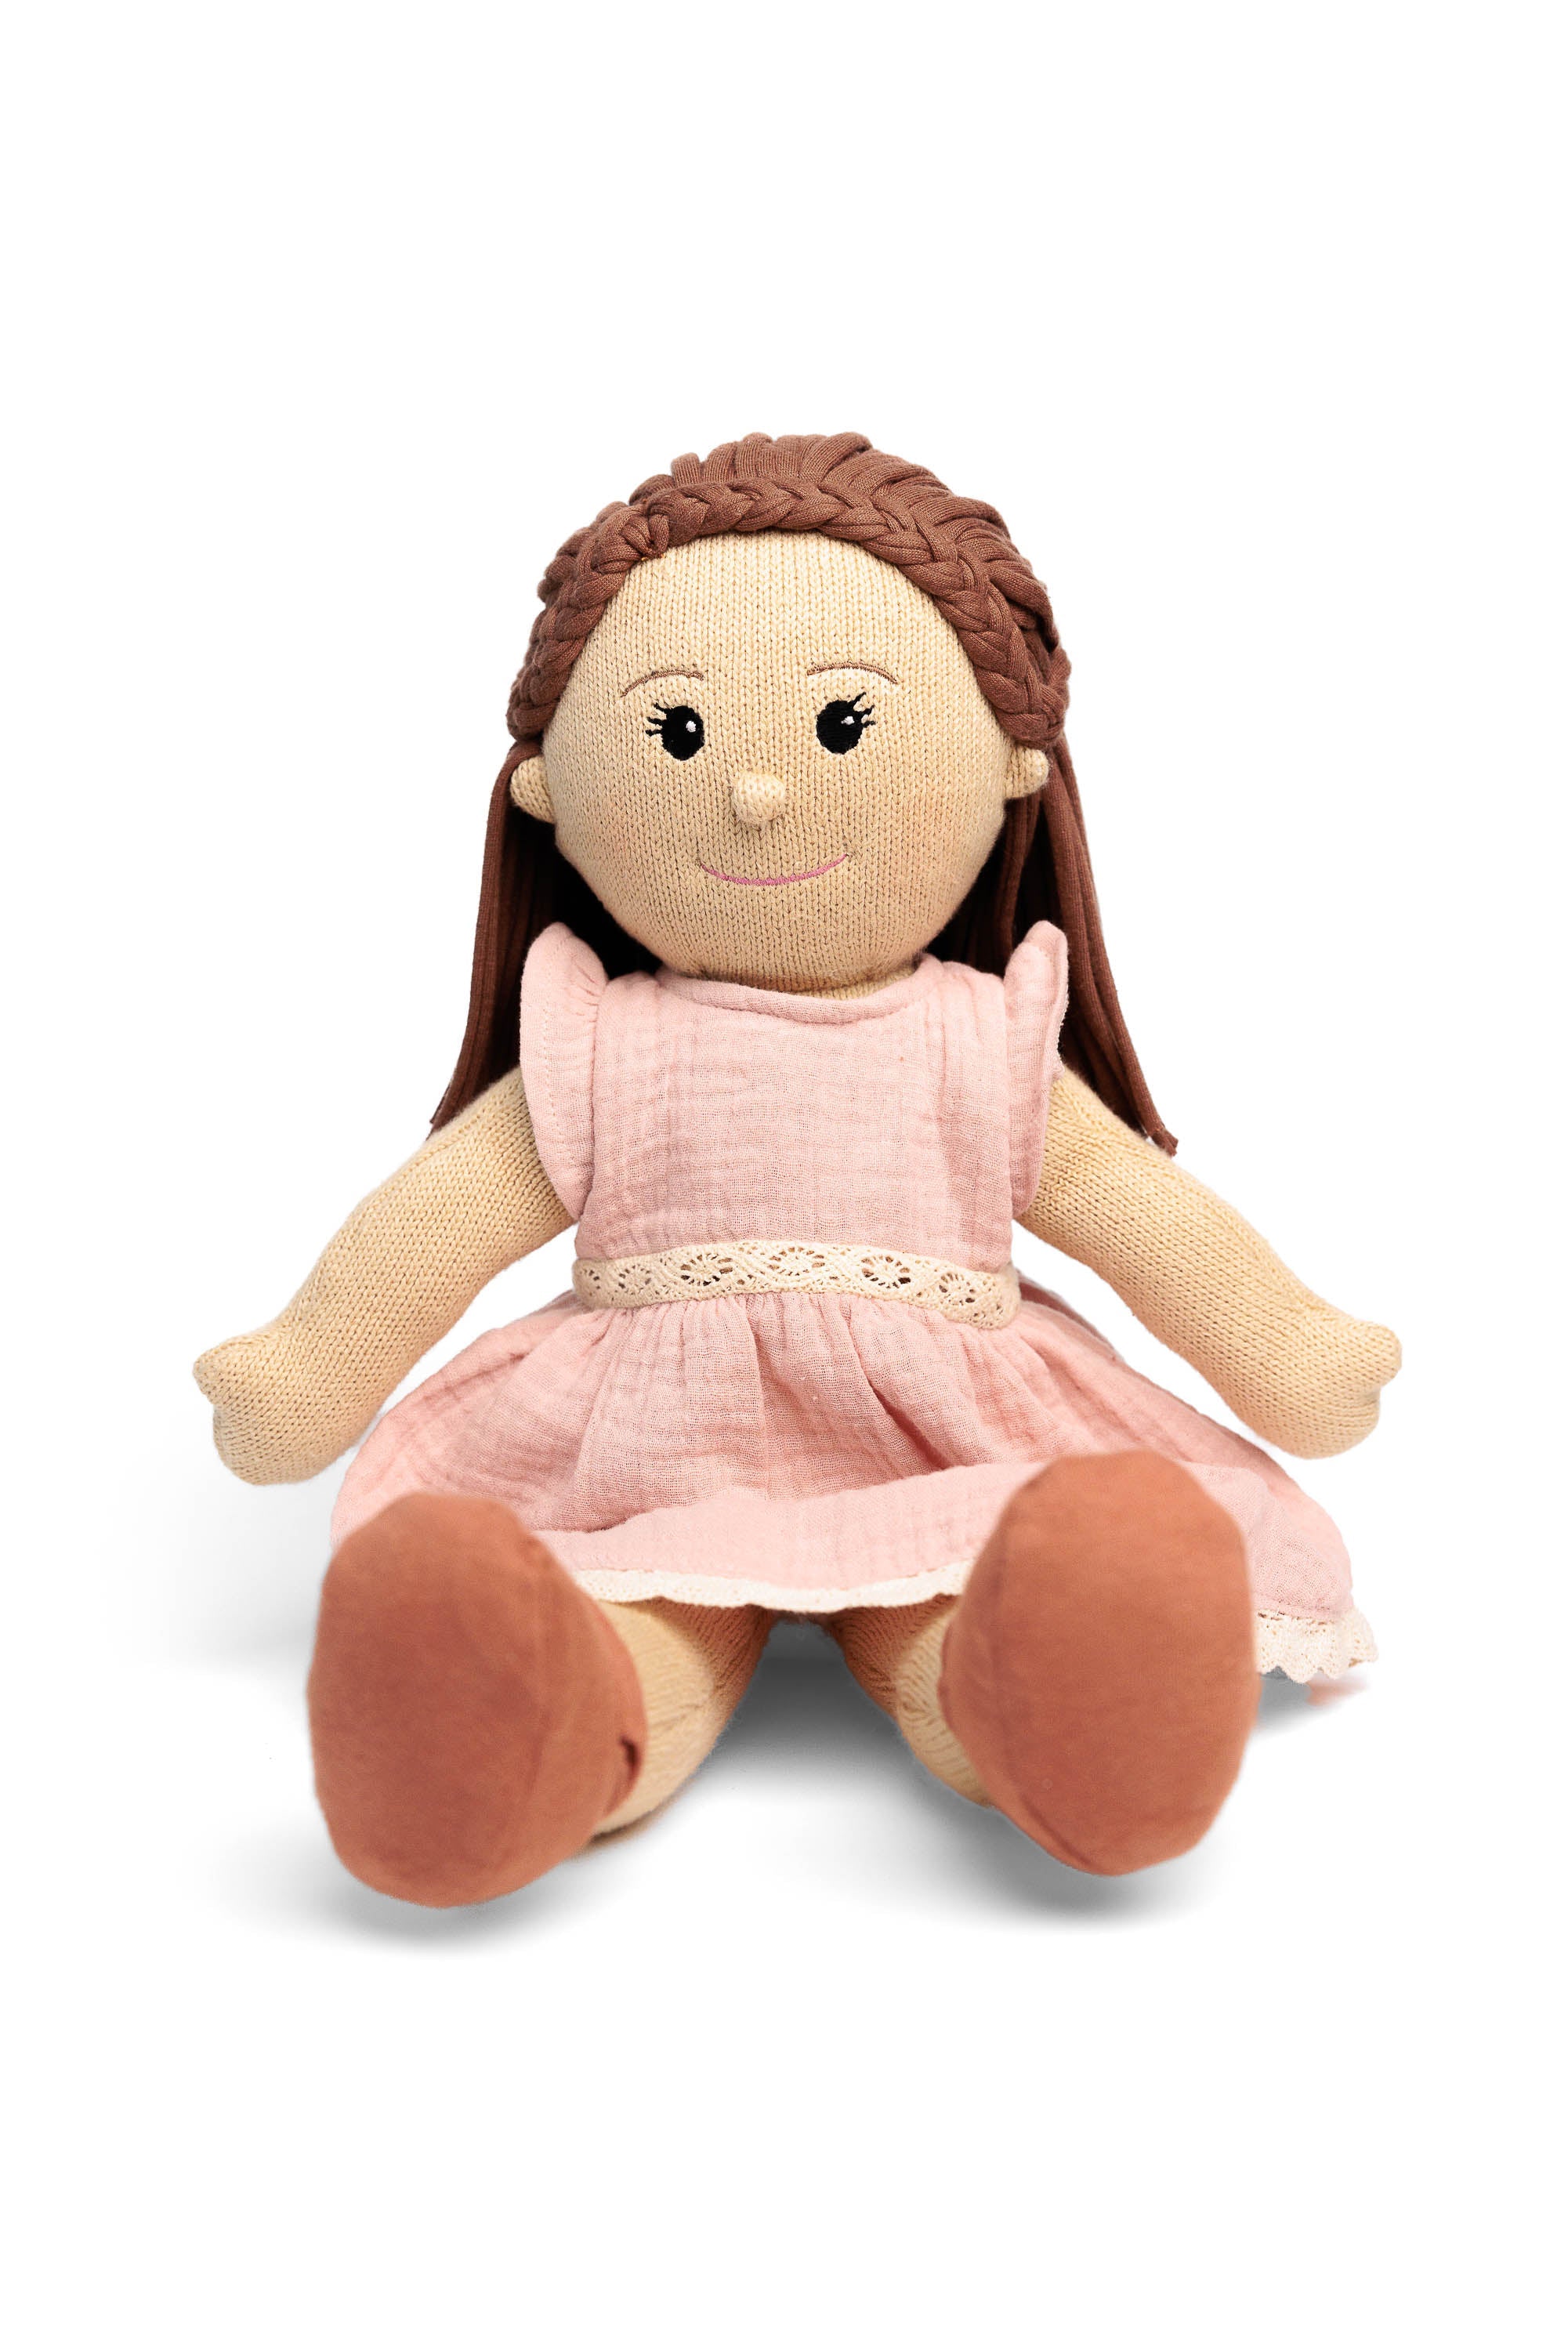 The Clementine collective knitted doll Clara